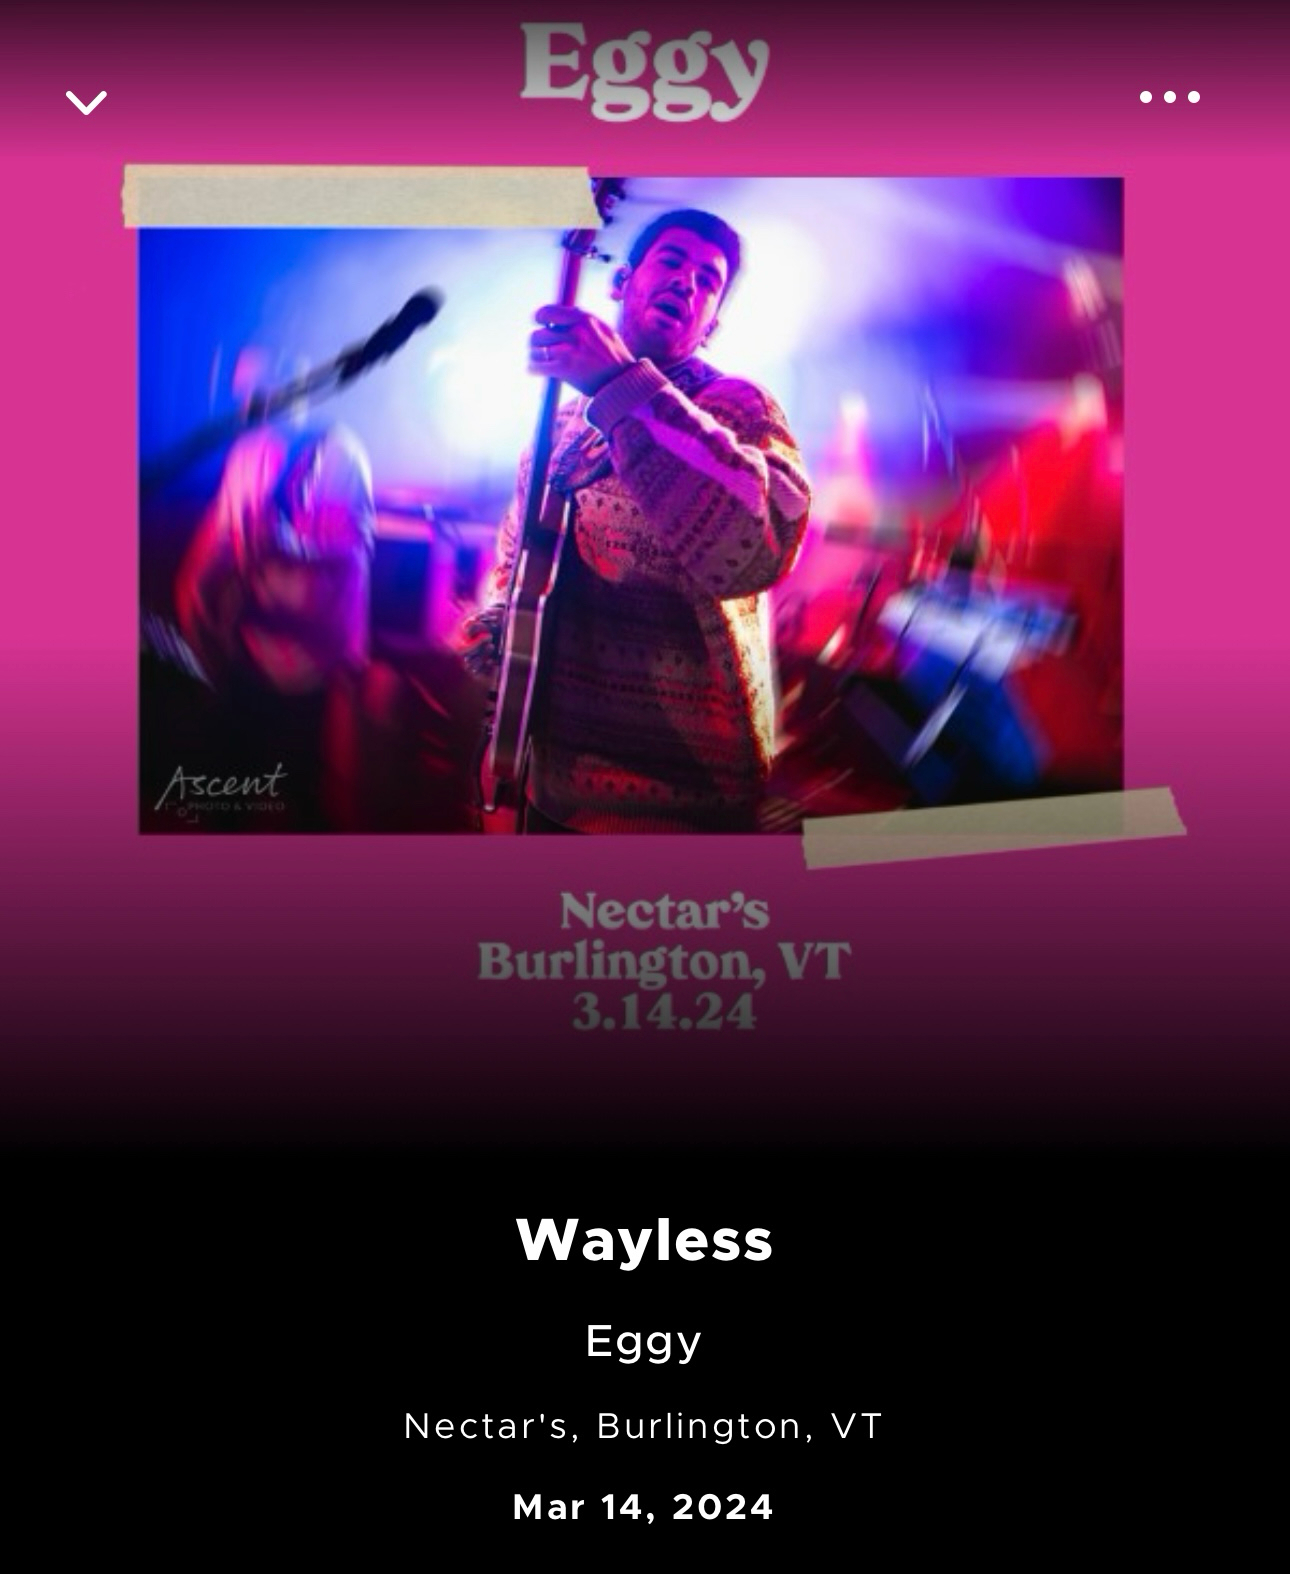 Promotional music event poster for the band Eggy at Nectar’s in Burlington, VT on March 14, 2024, with an image of a musician playing a guitar on stage, surrounded by colorful stage lighting.